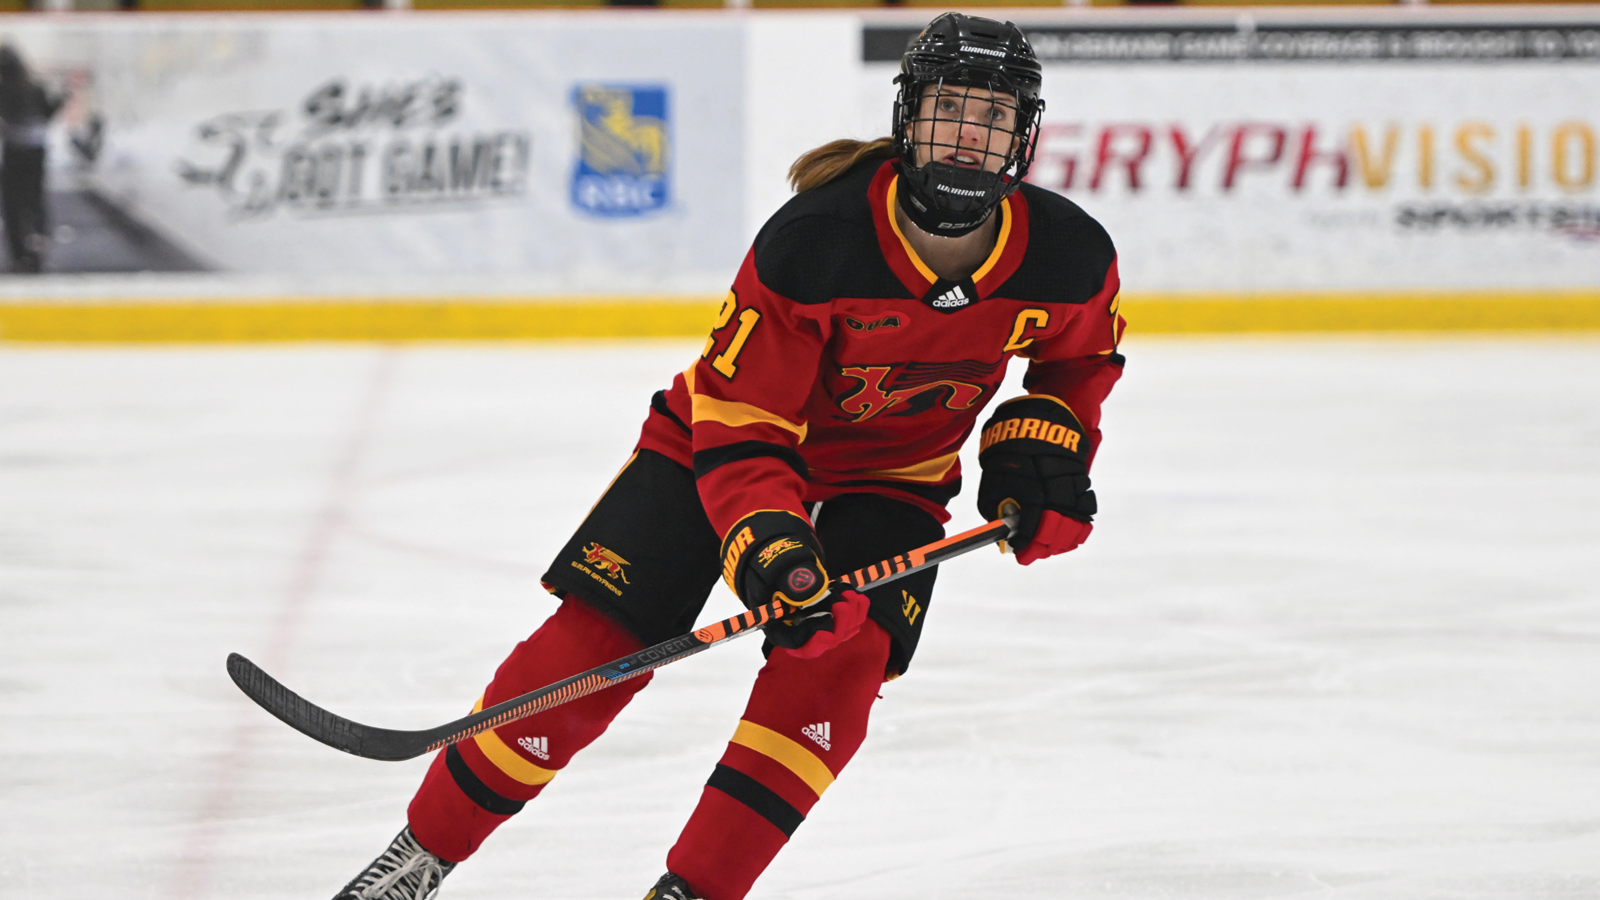 Guelph women's hockey player Hannah Tait skating on the ice during a game